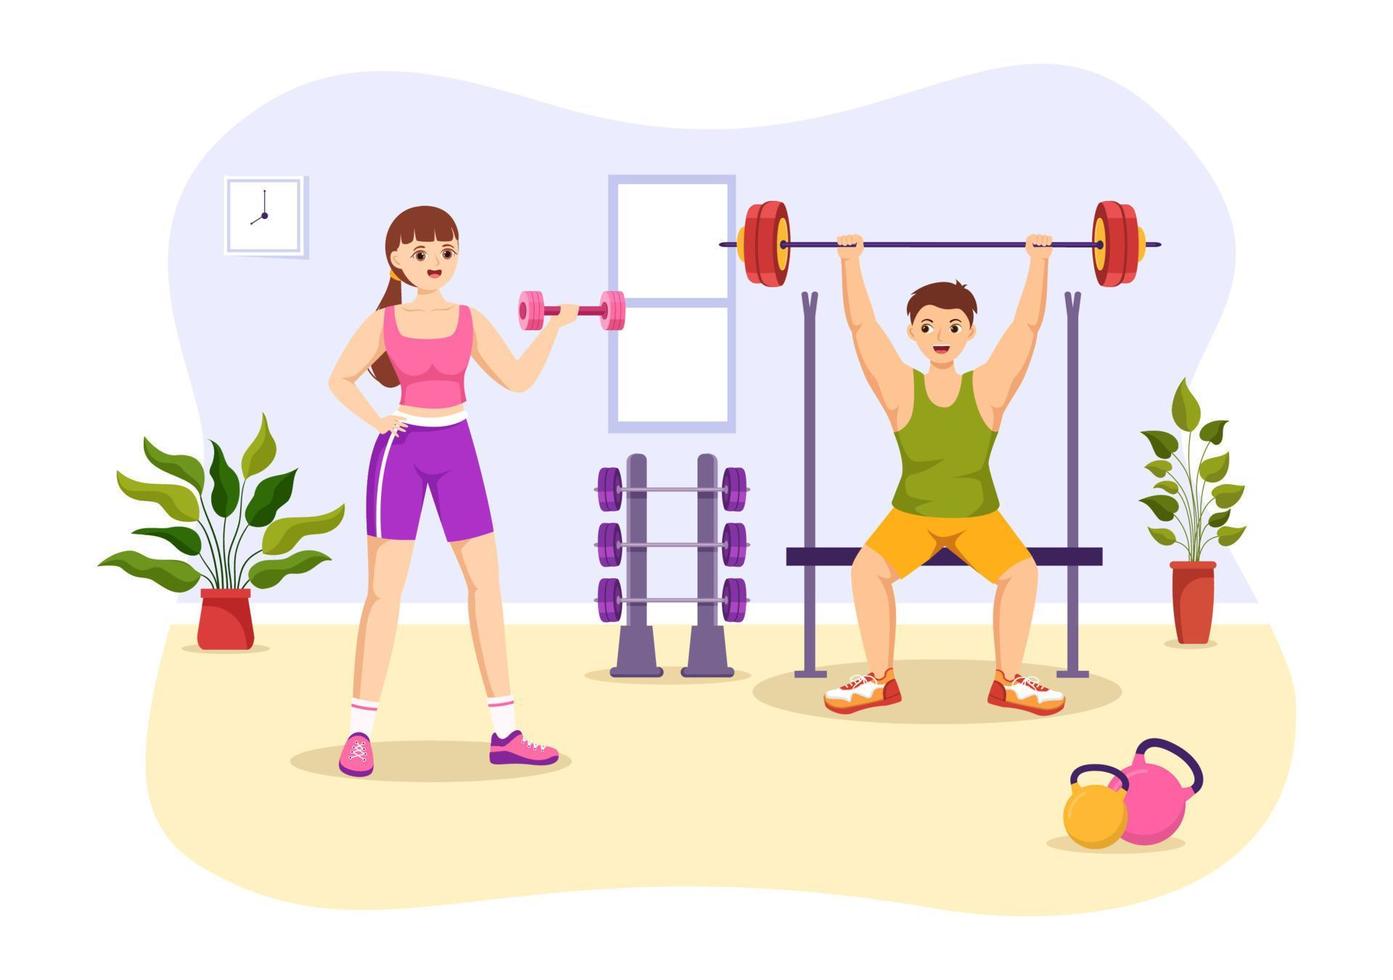 Weightlifting Sport Illustration with Athlete Lifts a Heavy Barbell, Gym Equipment and Bodybuilder Training in Flat Cartoon Hand Drawn Templates vector